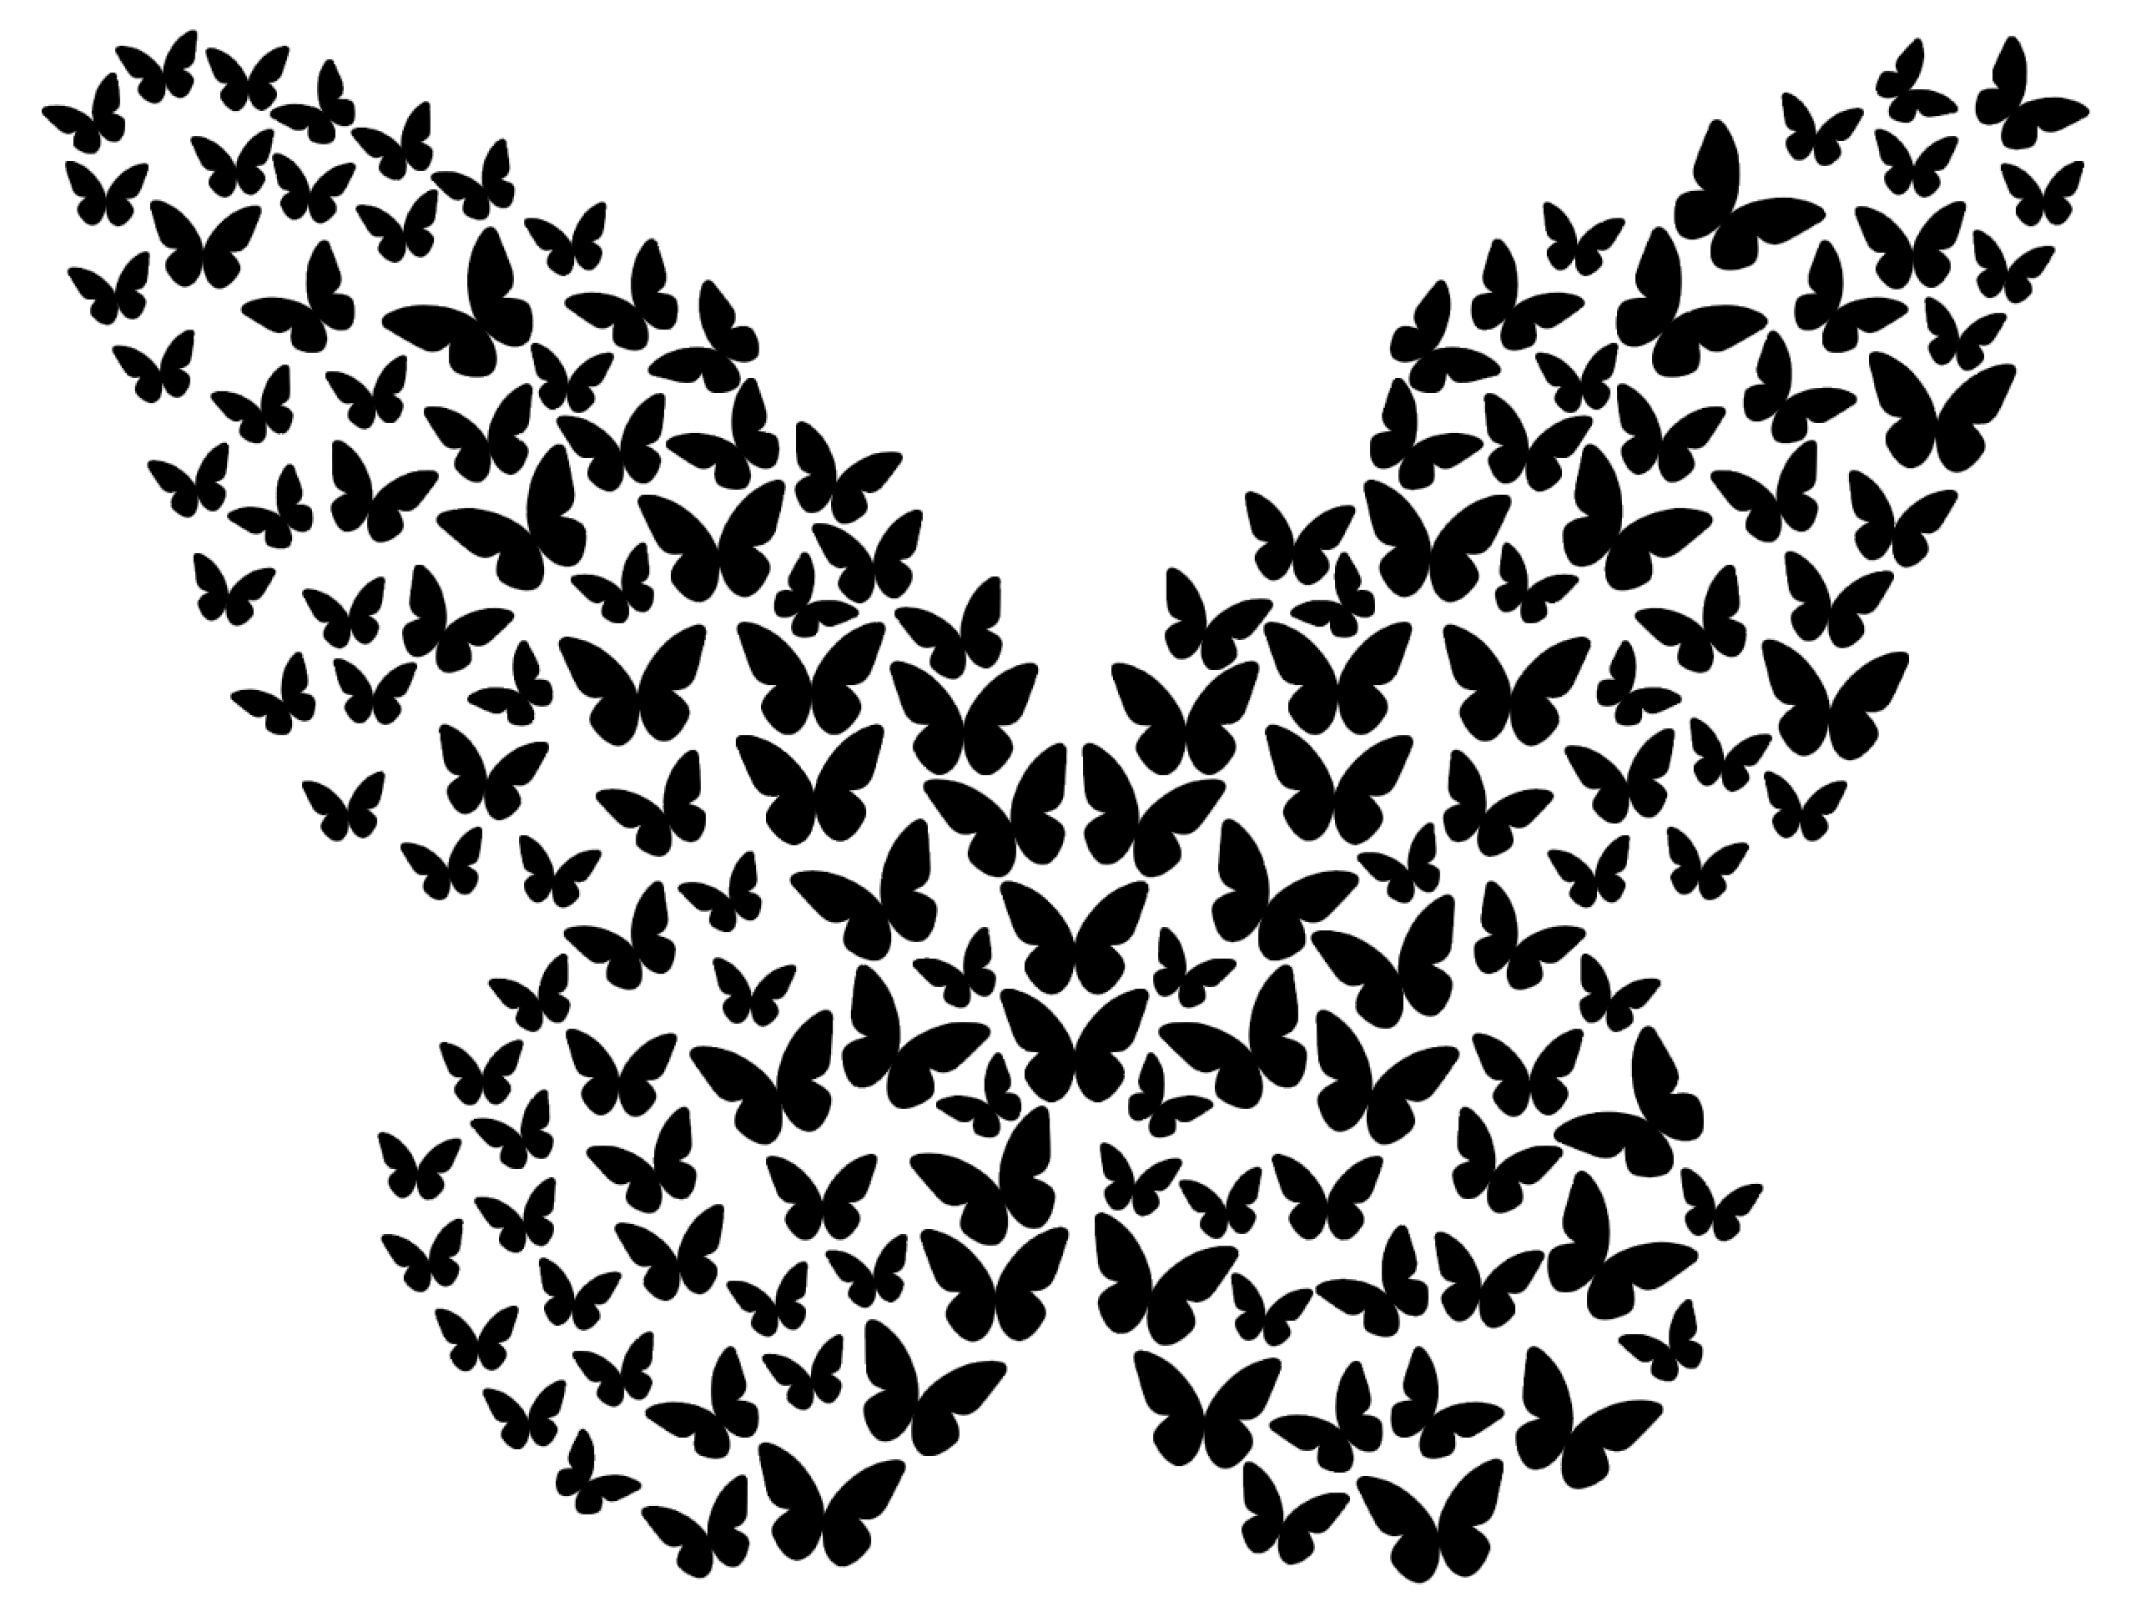 Black butterfly pattern made up of many smaller butterflies.